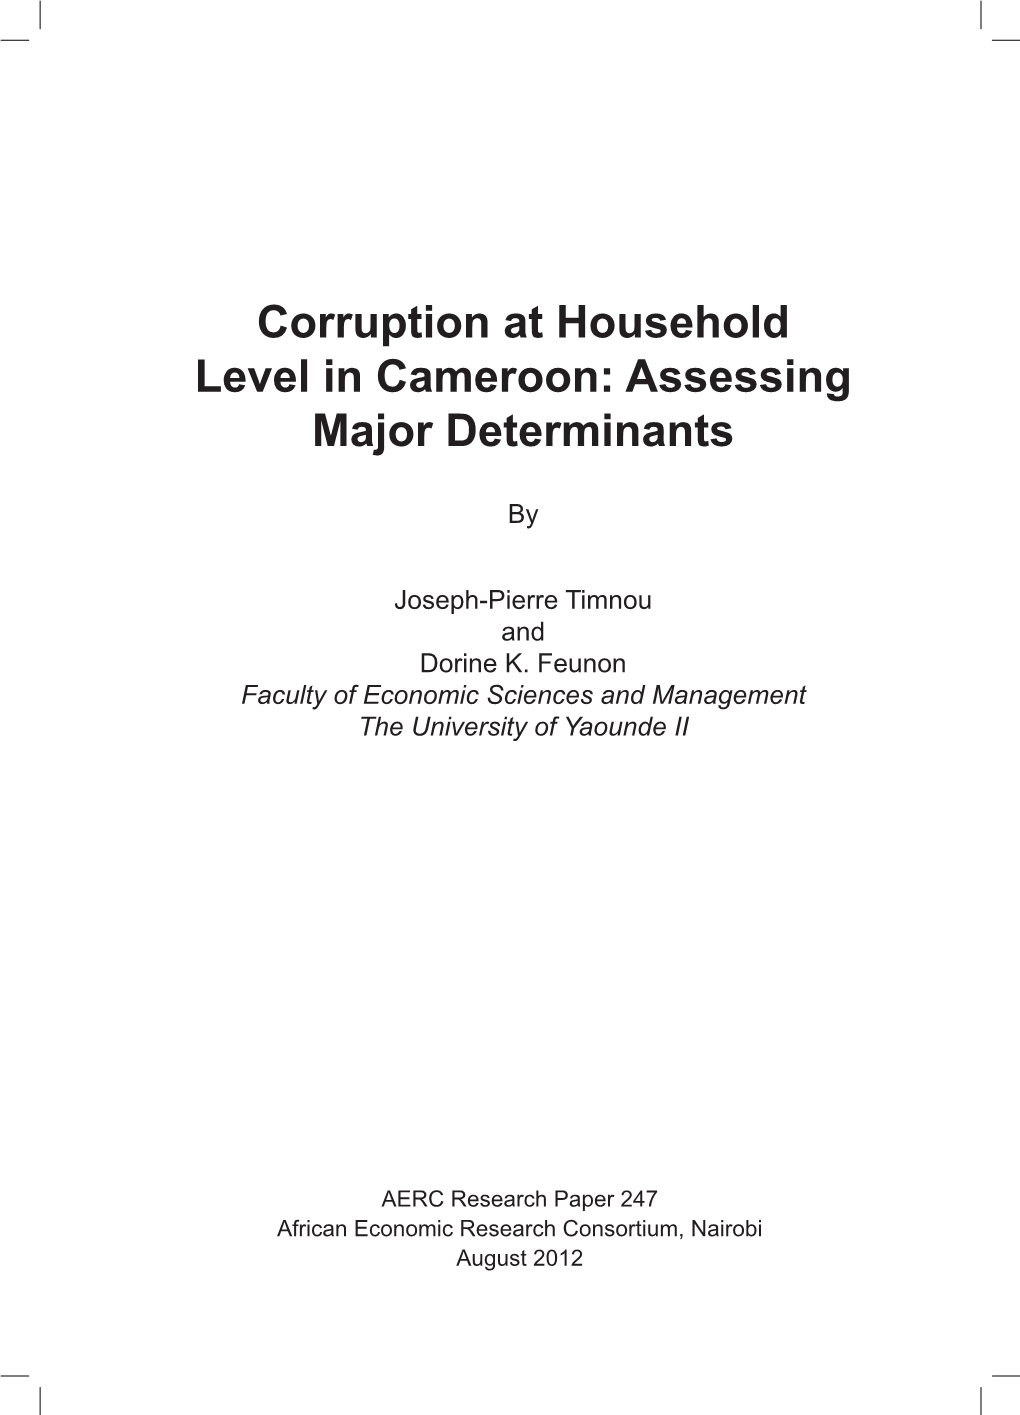 Corruption at Household Level in Cameroon: Assessing Major Determinants